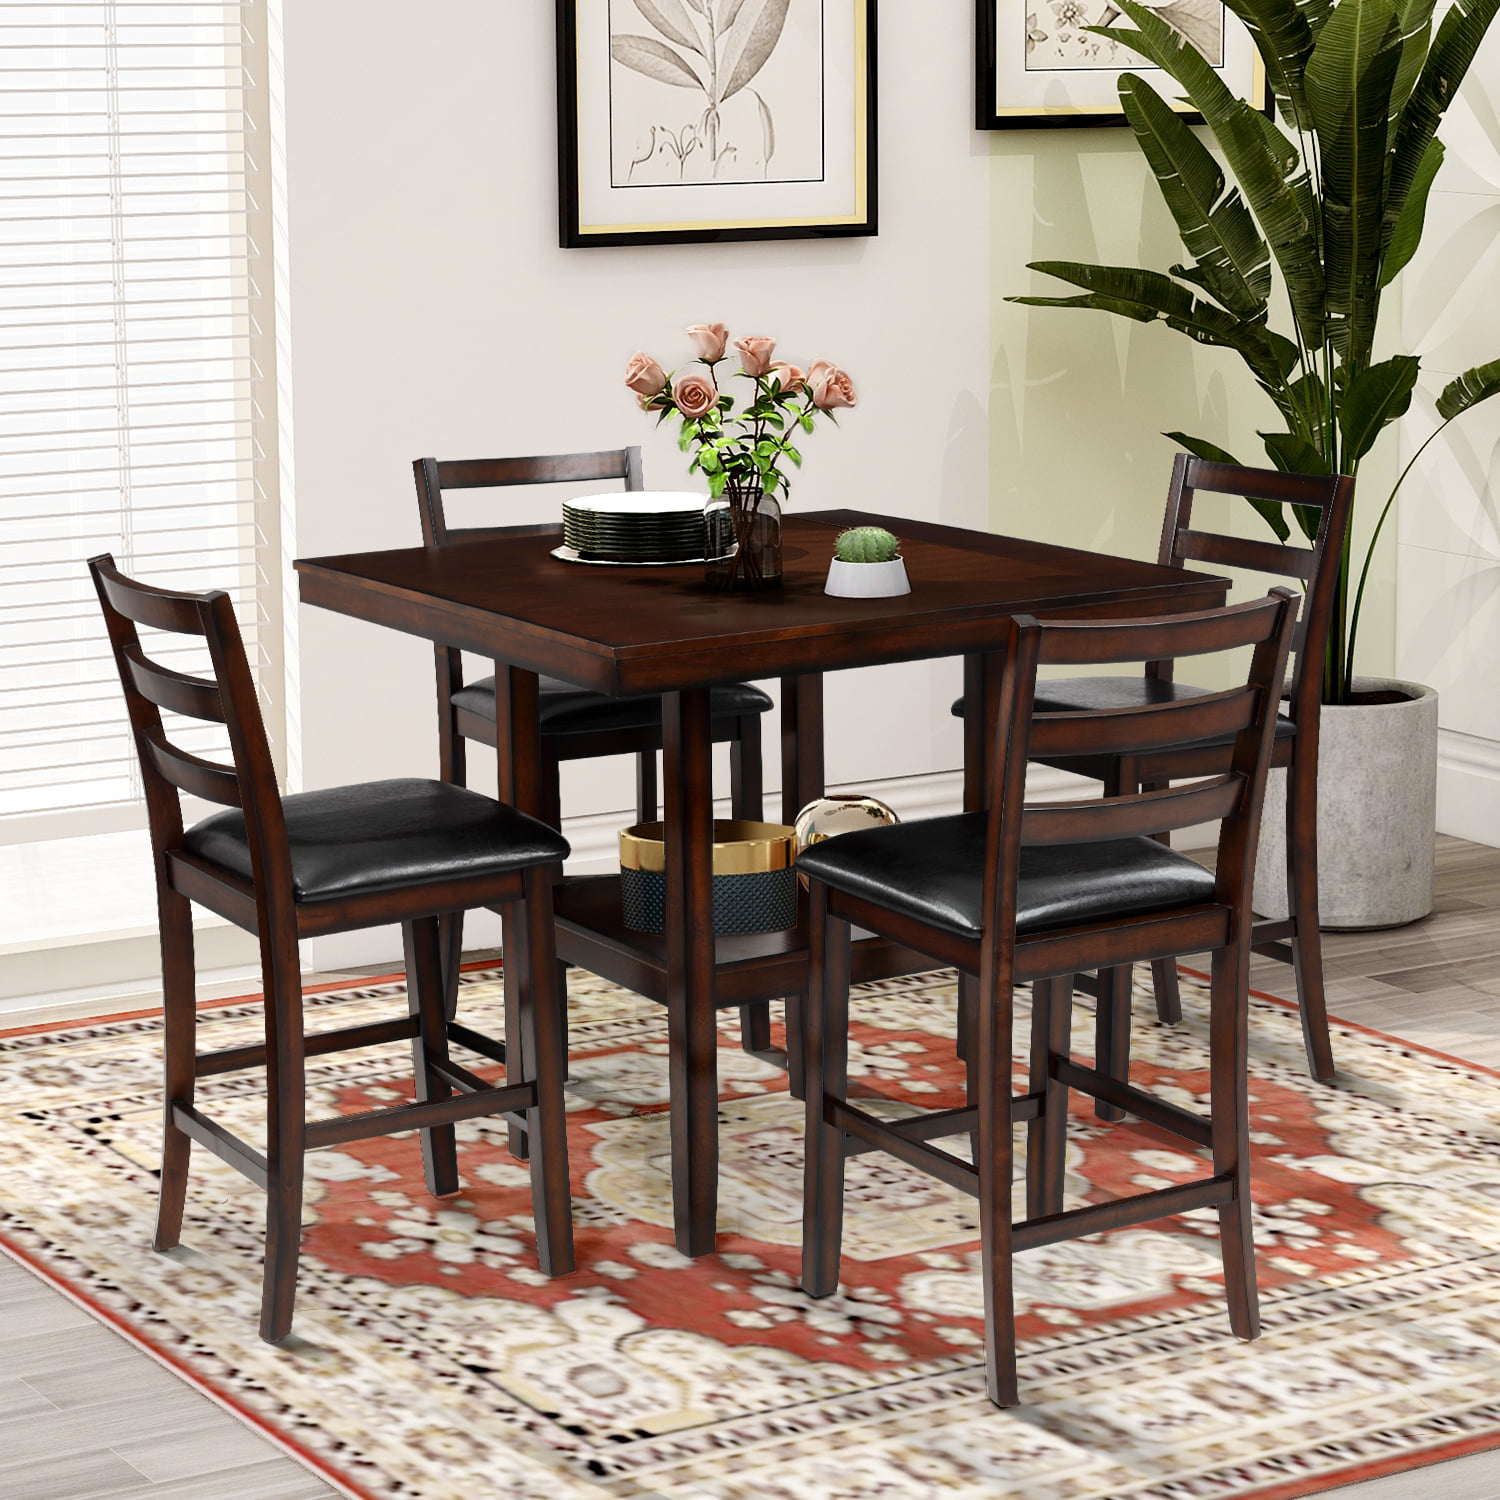 EUROCO 5-Piece Counter Height Dining Set, Wooden Dining Set with Padded